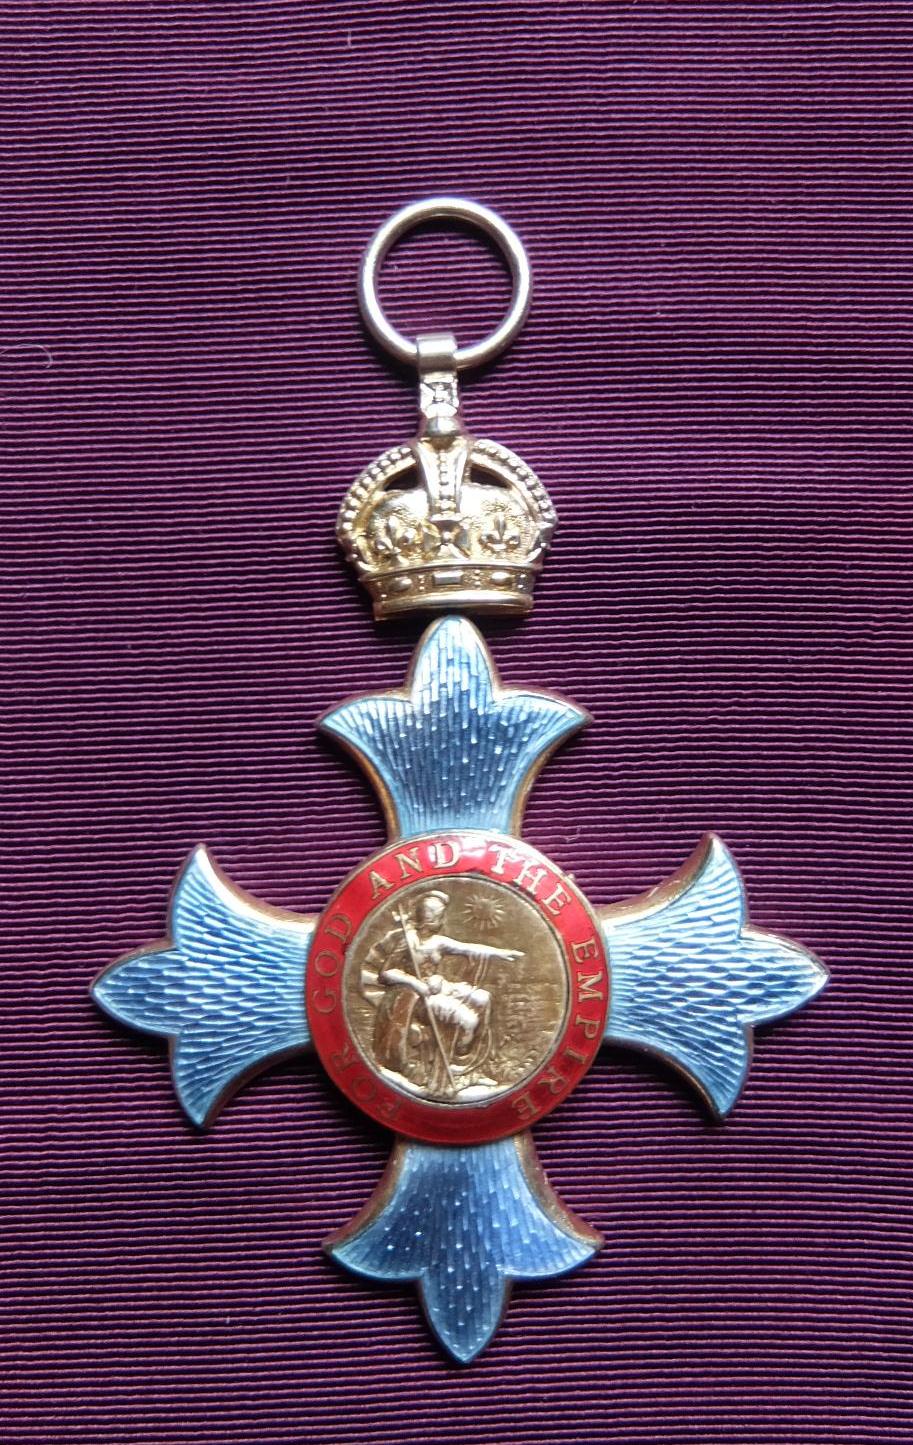 1917 insignia - 1917 pattern badge and star of a knight grand cross (GBE)